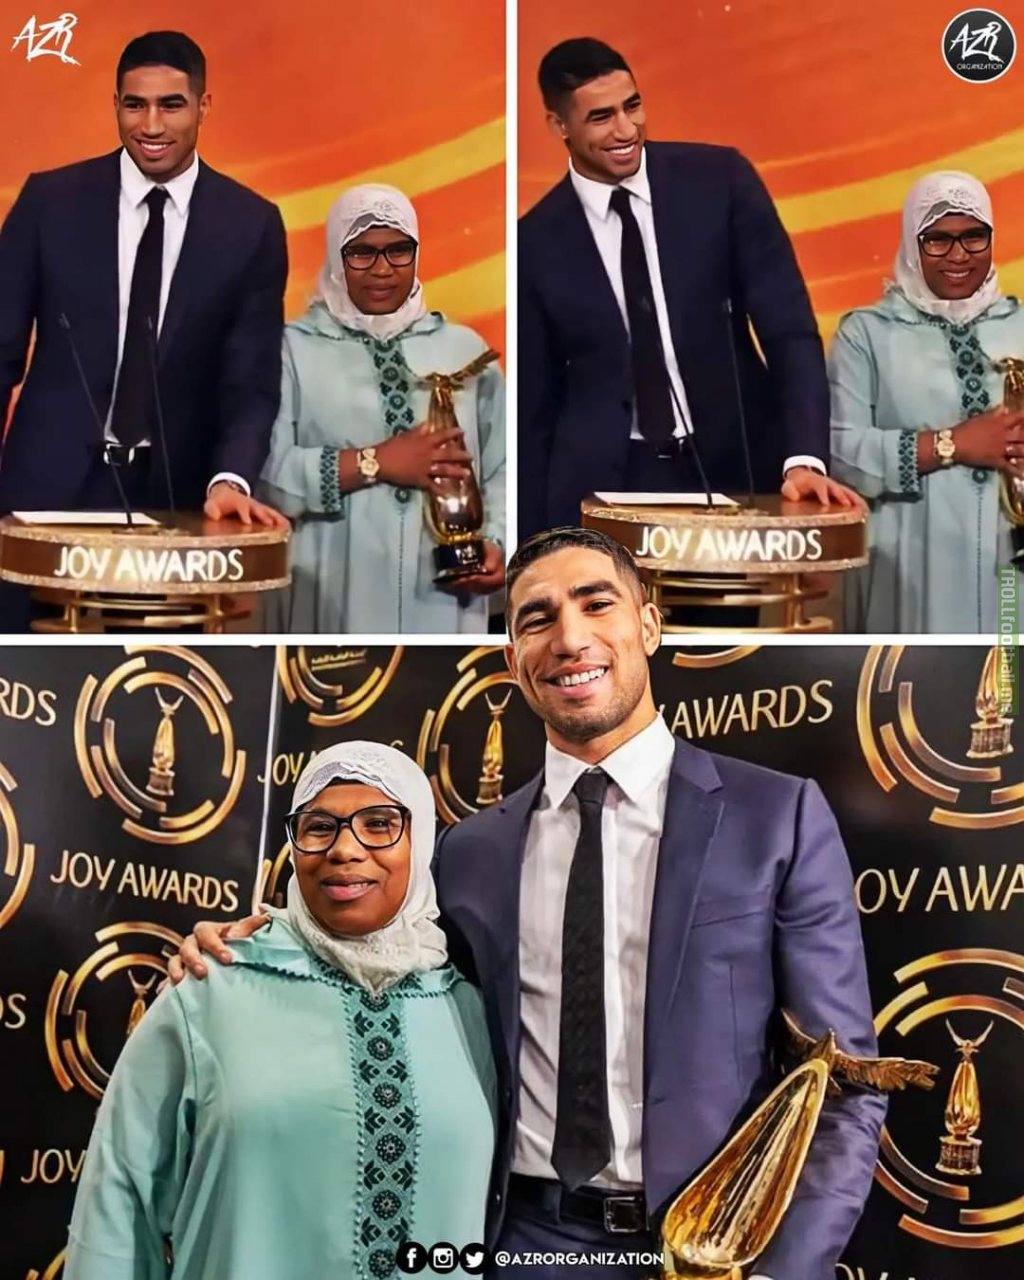 Achraf Hakimi won The Best Arab Sportsman of the Year award during the Joy Awards Ceremony in Riyadh, Hakimi accepted the trophy with his mother on the stage.